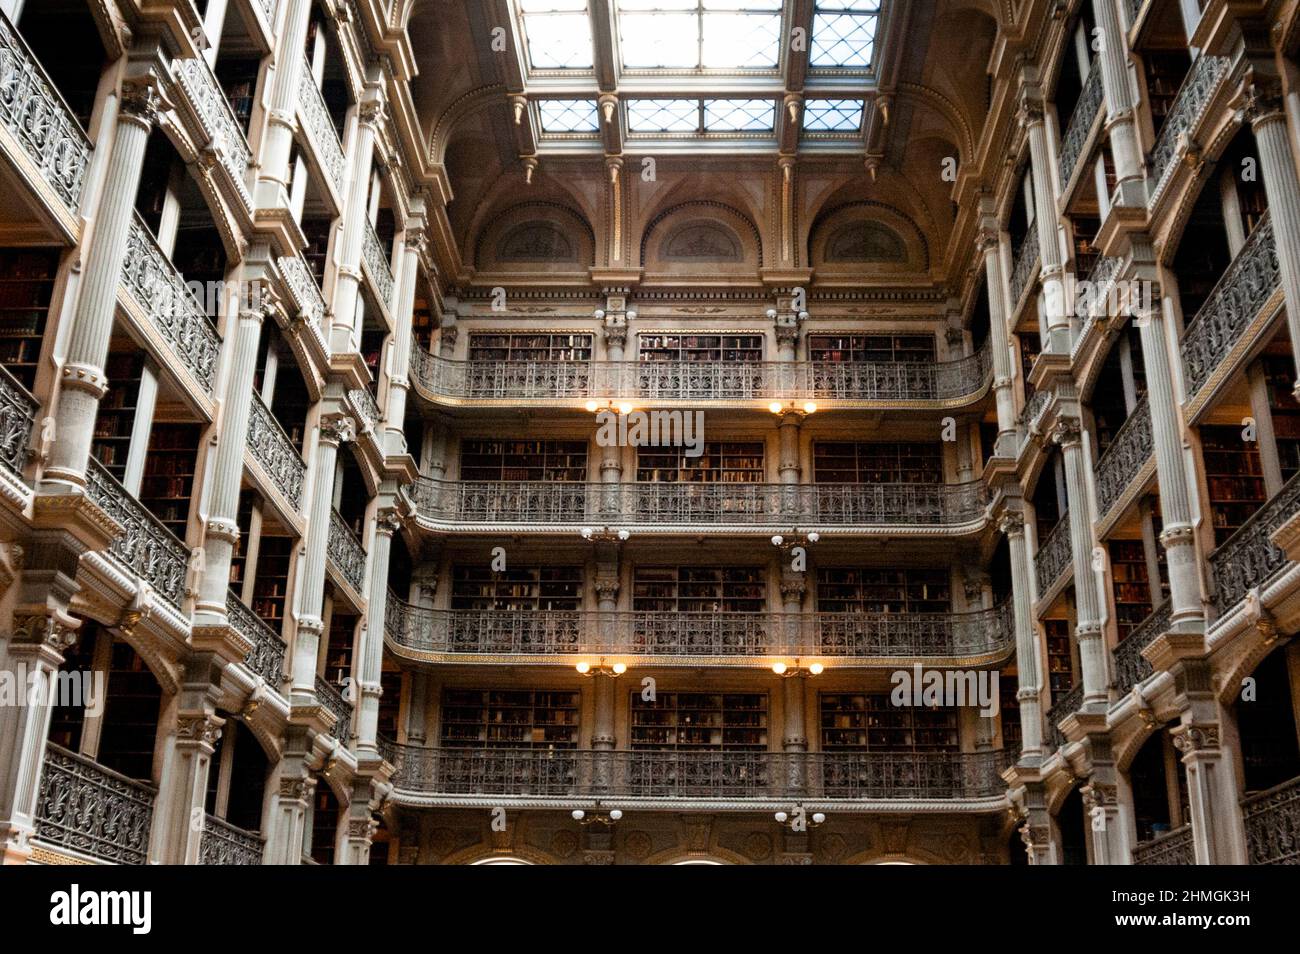 The George Peabody Library in Baltimore, Maryland. Stock Photo